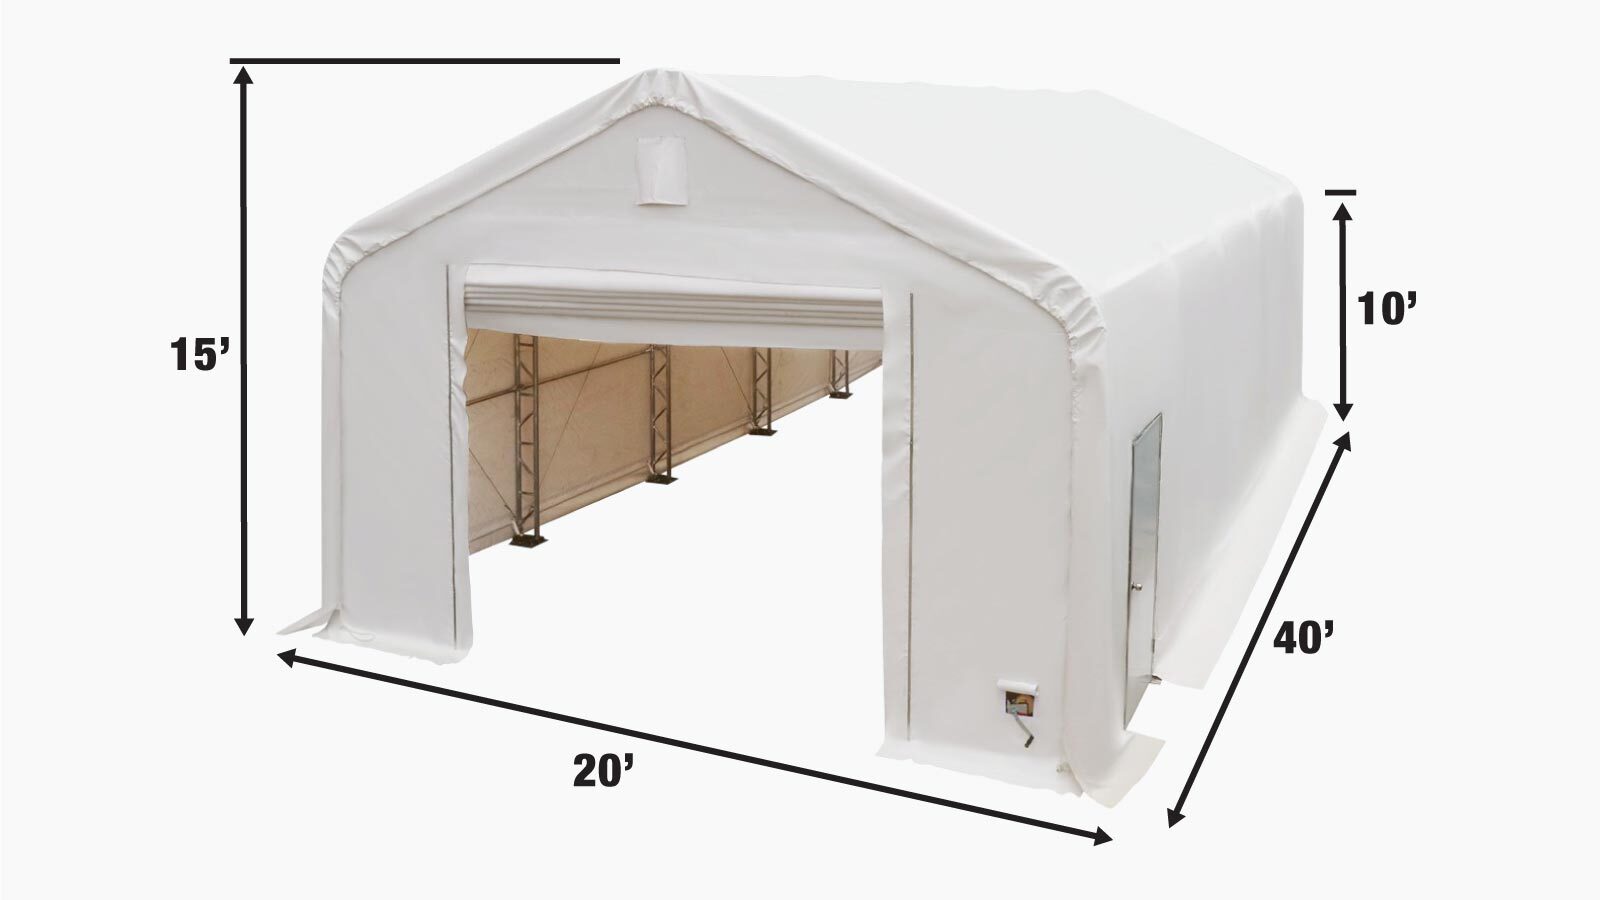 TMG Industrial Pro Series 20' x 40' Dual Truss Storage Shelter with Heavy Duty 17 oz PVC Cover & Drive Through Doors, TMG-DT2041-PRO-specifications-image